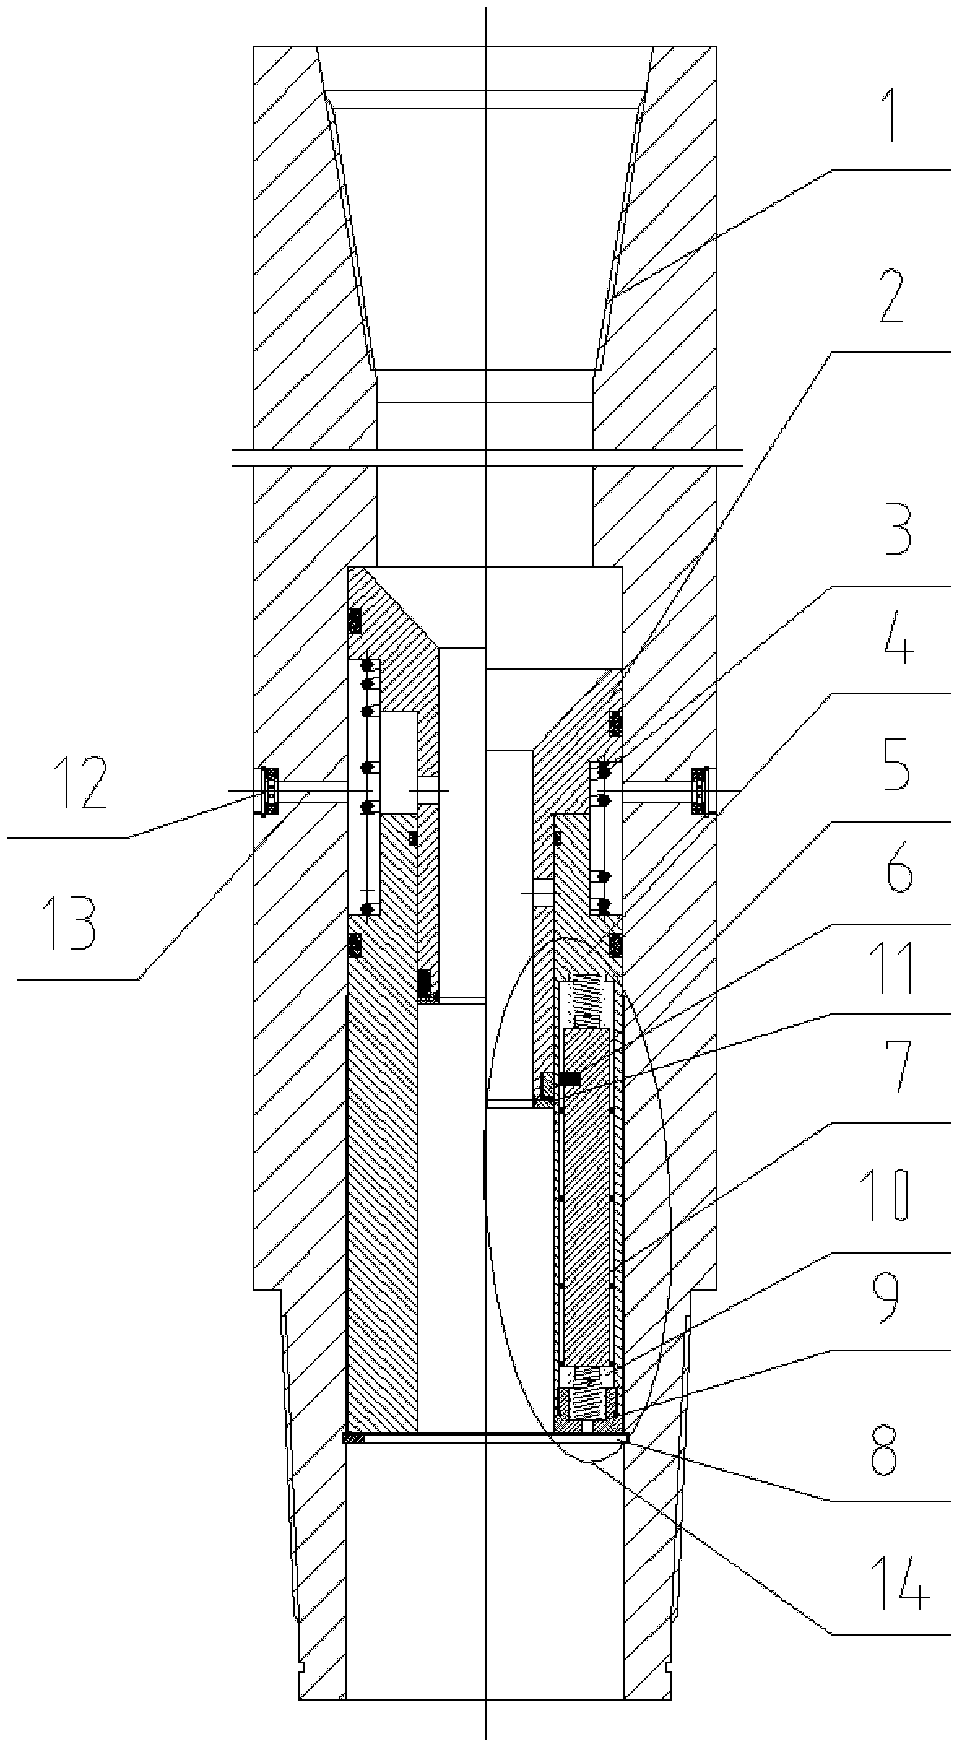 By-pass valve capable of memorizing working time for screw drill